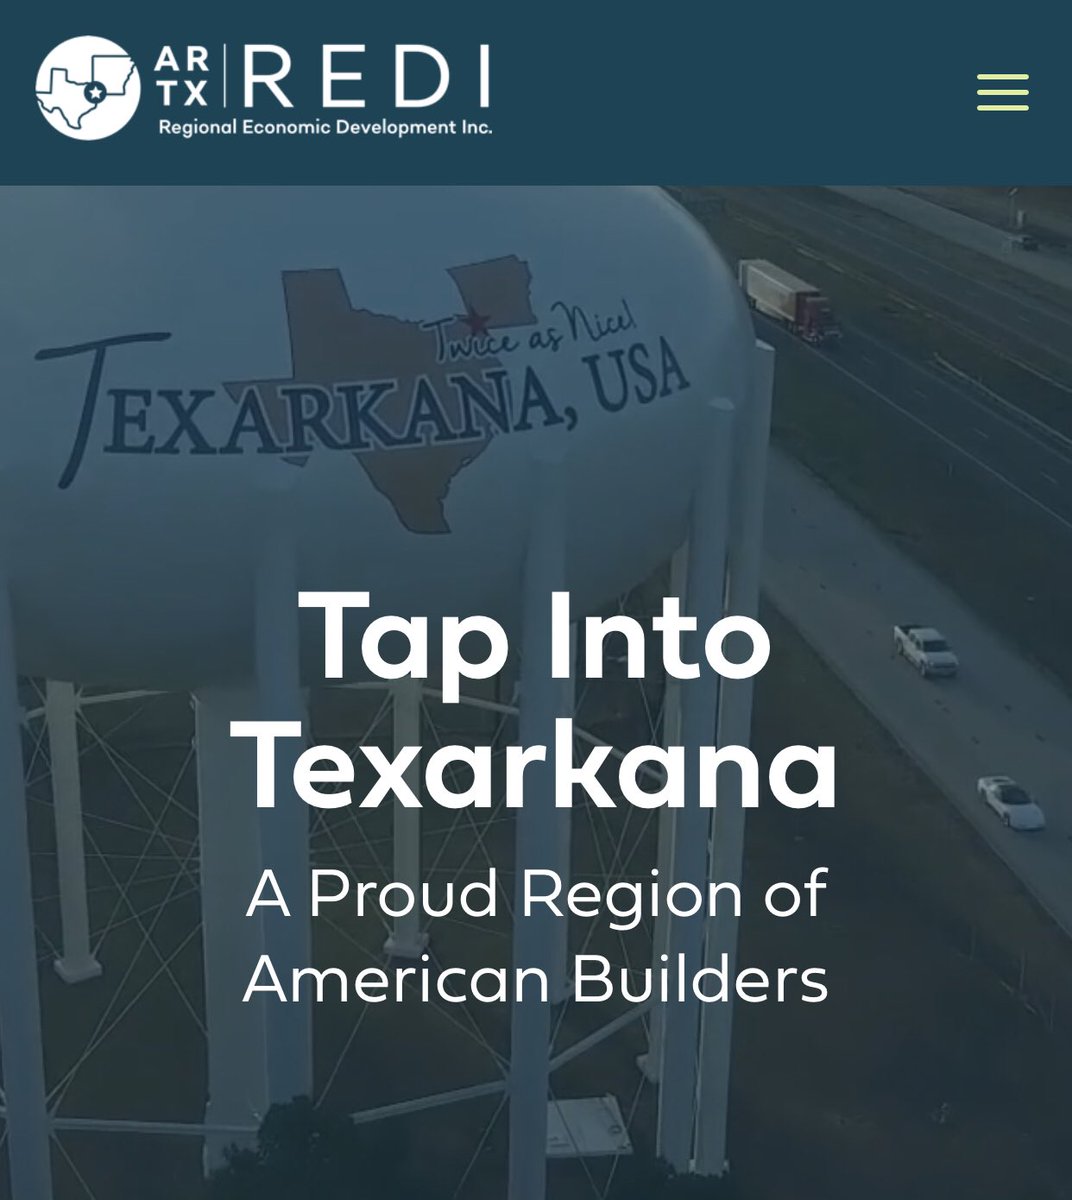 We’ve just launched the new and improved AR-TX REDI website! Check it out on your desktop or mobile device. Are you REDI for the Future?